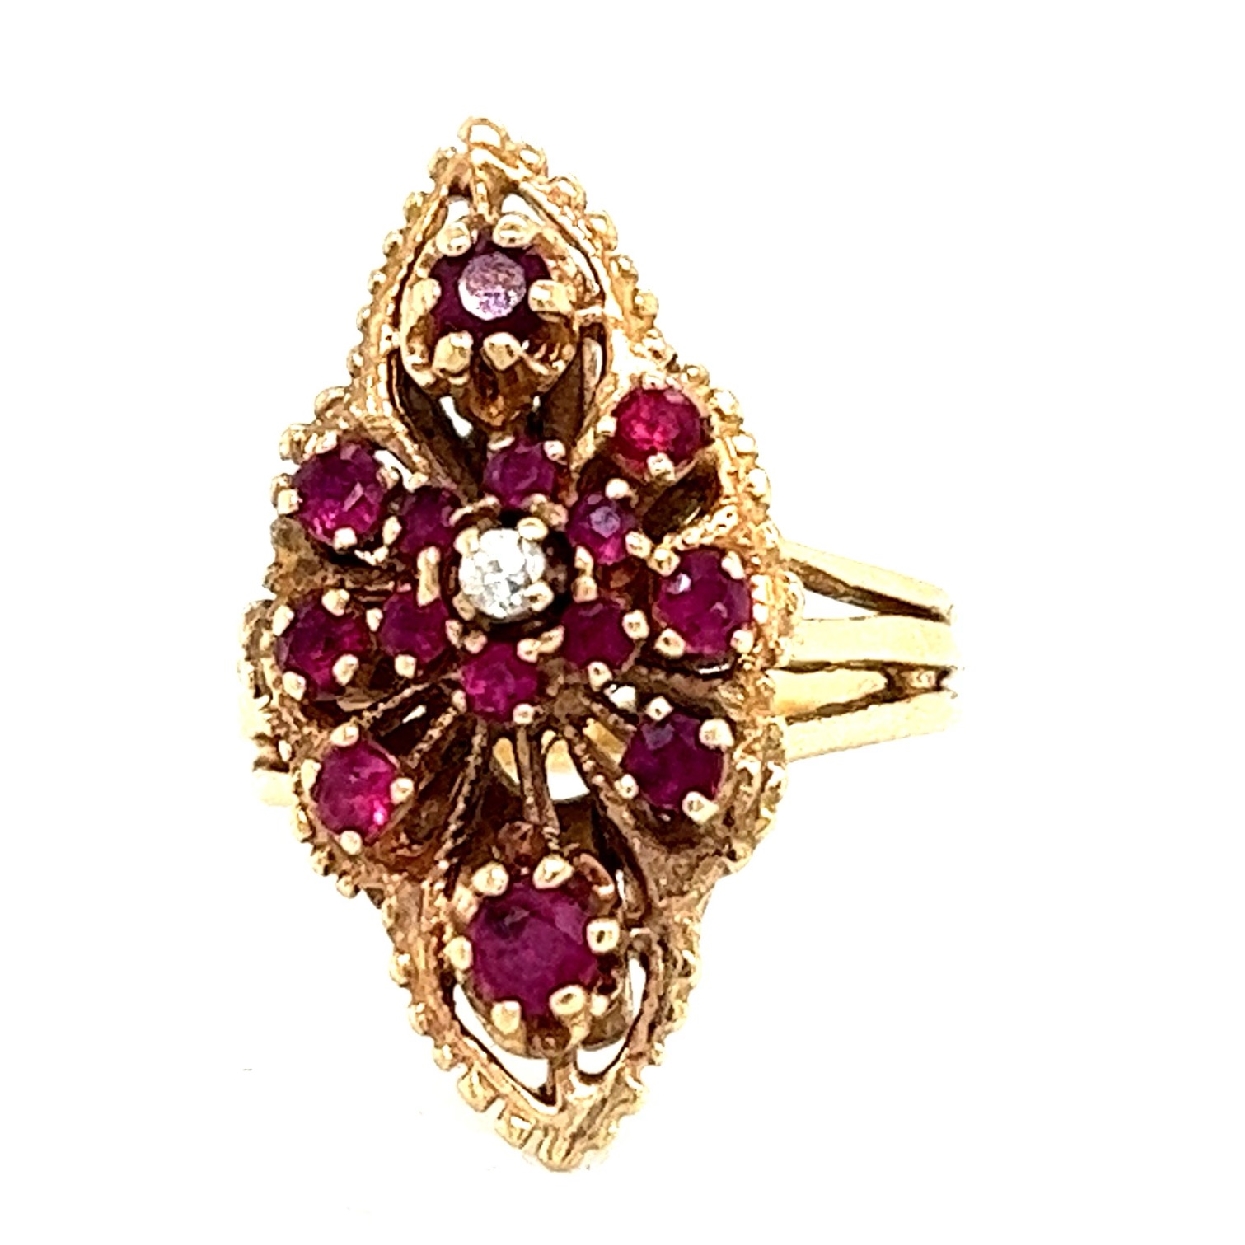 14K Yellow Gold Ruby and Diamond Ring with Filigree

Size 5